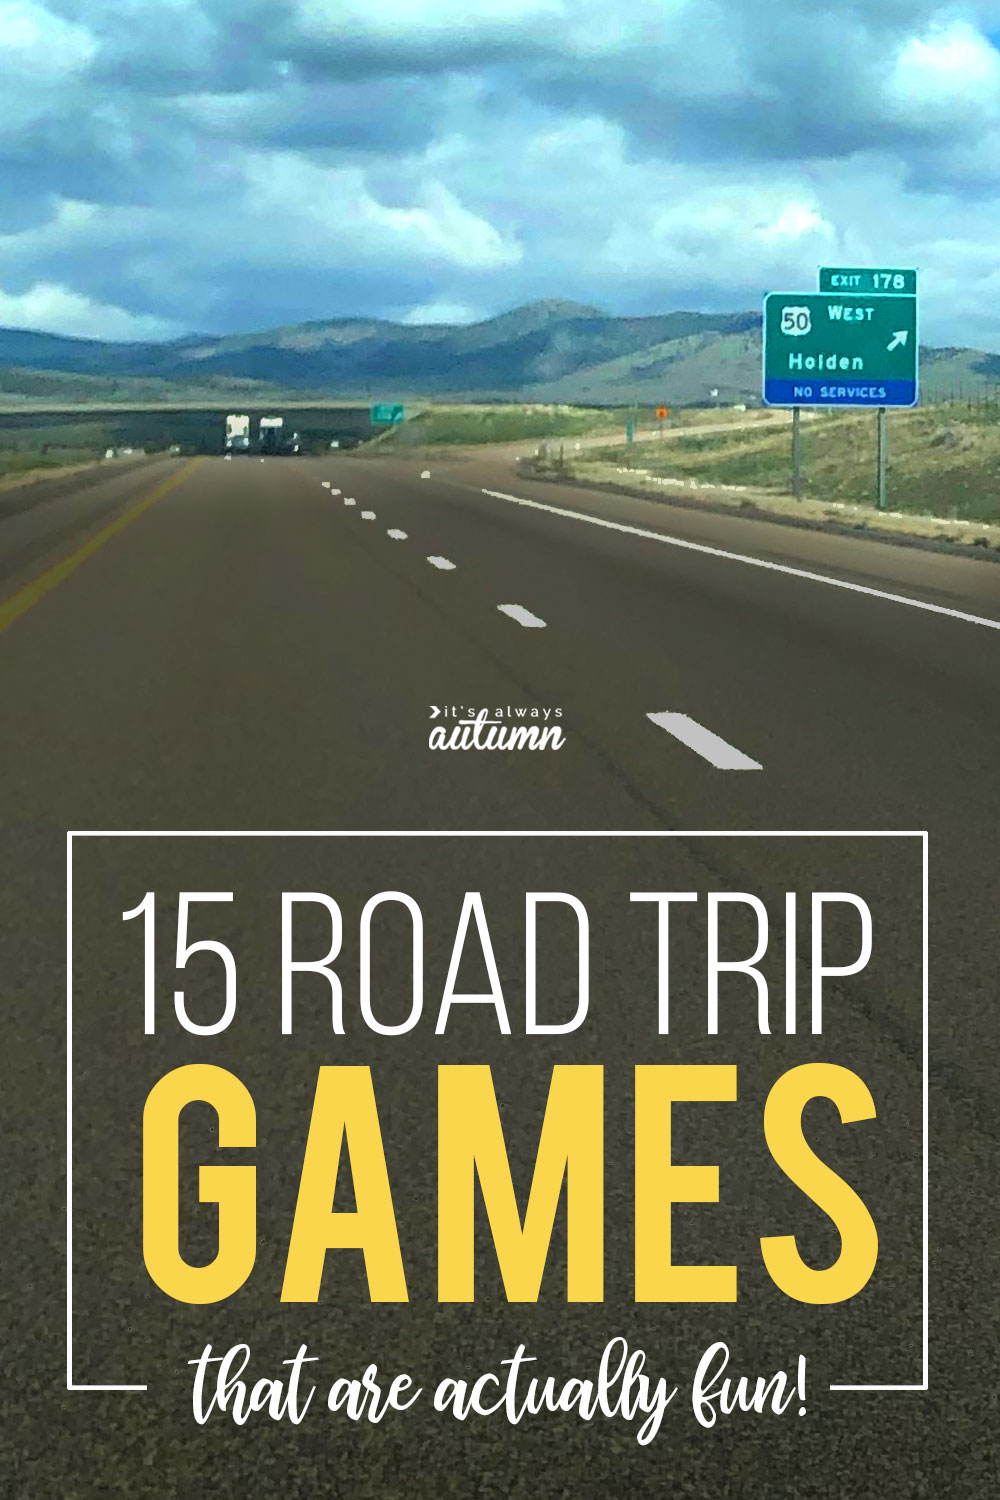 Easy road trip games that are actually fun! 15 games to play in the car.